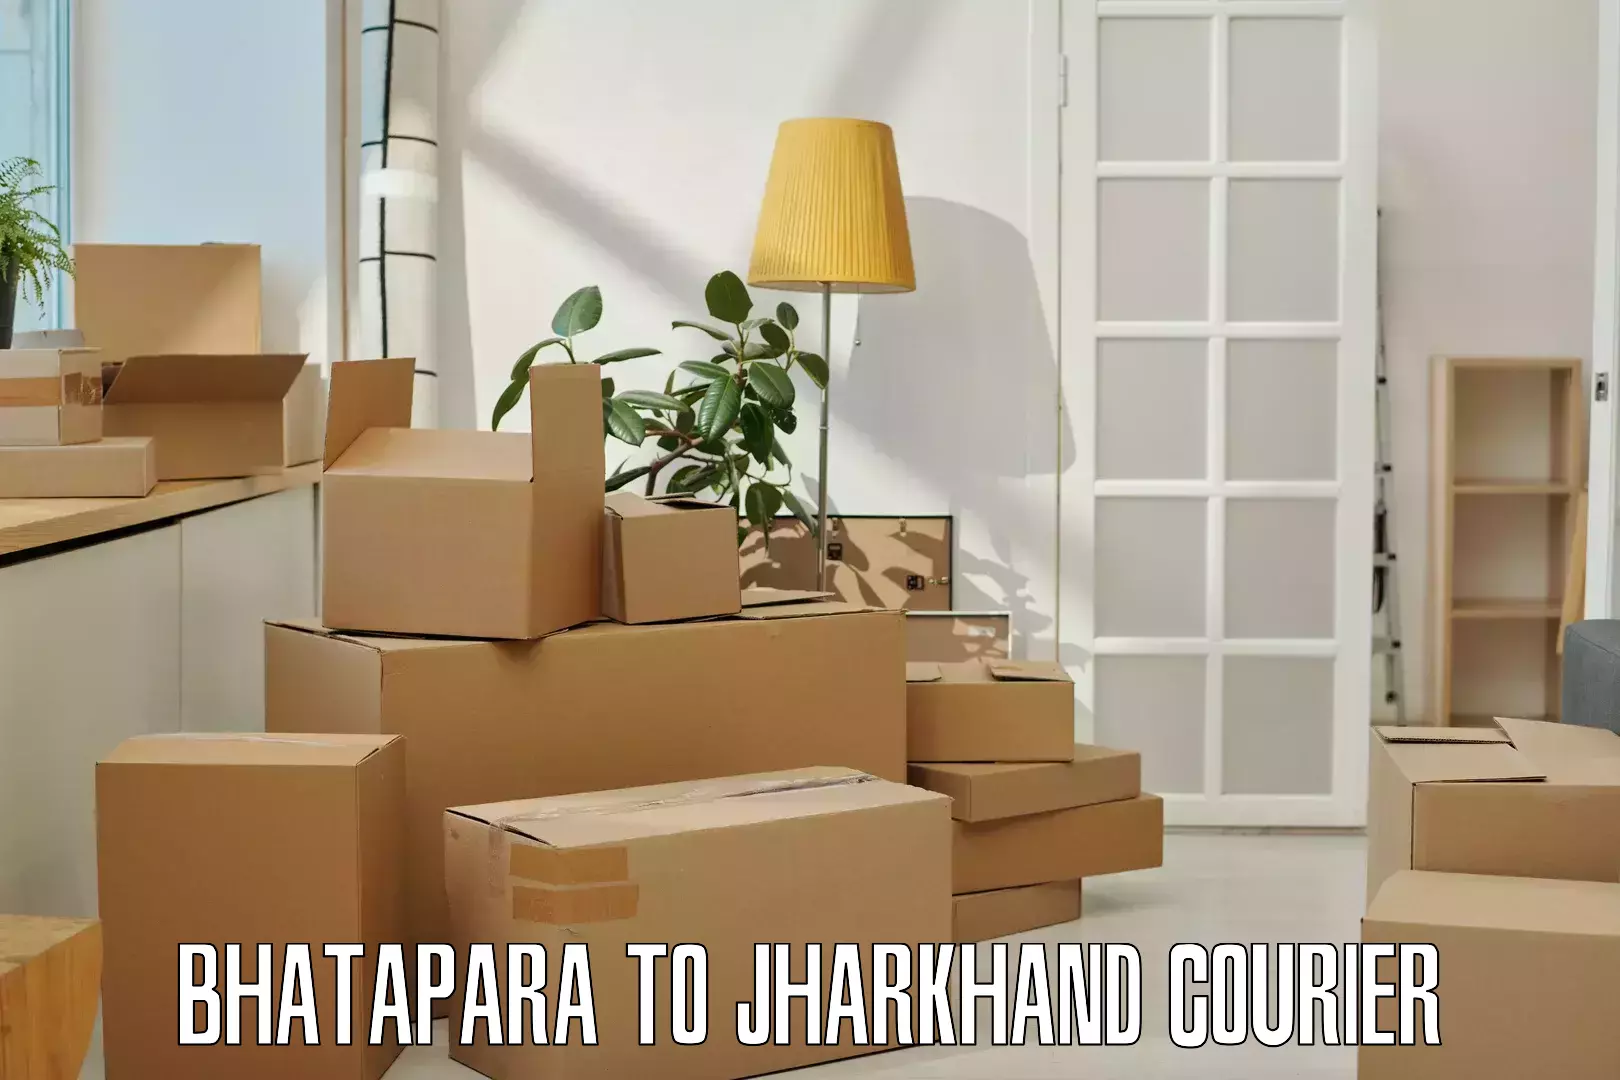 On-call courier service Bhatapara to Chouparan